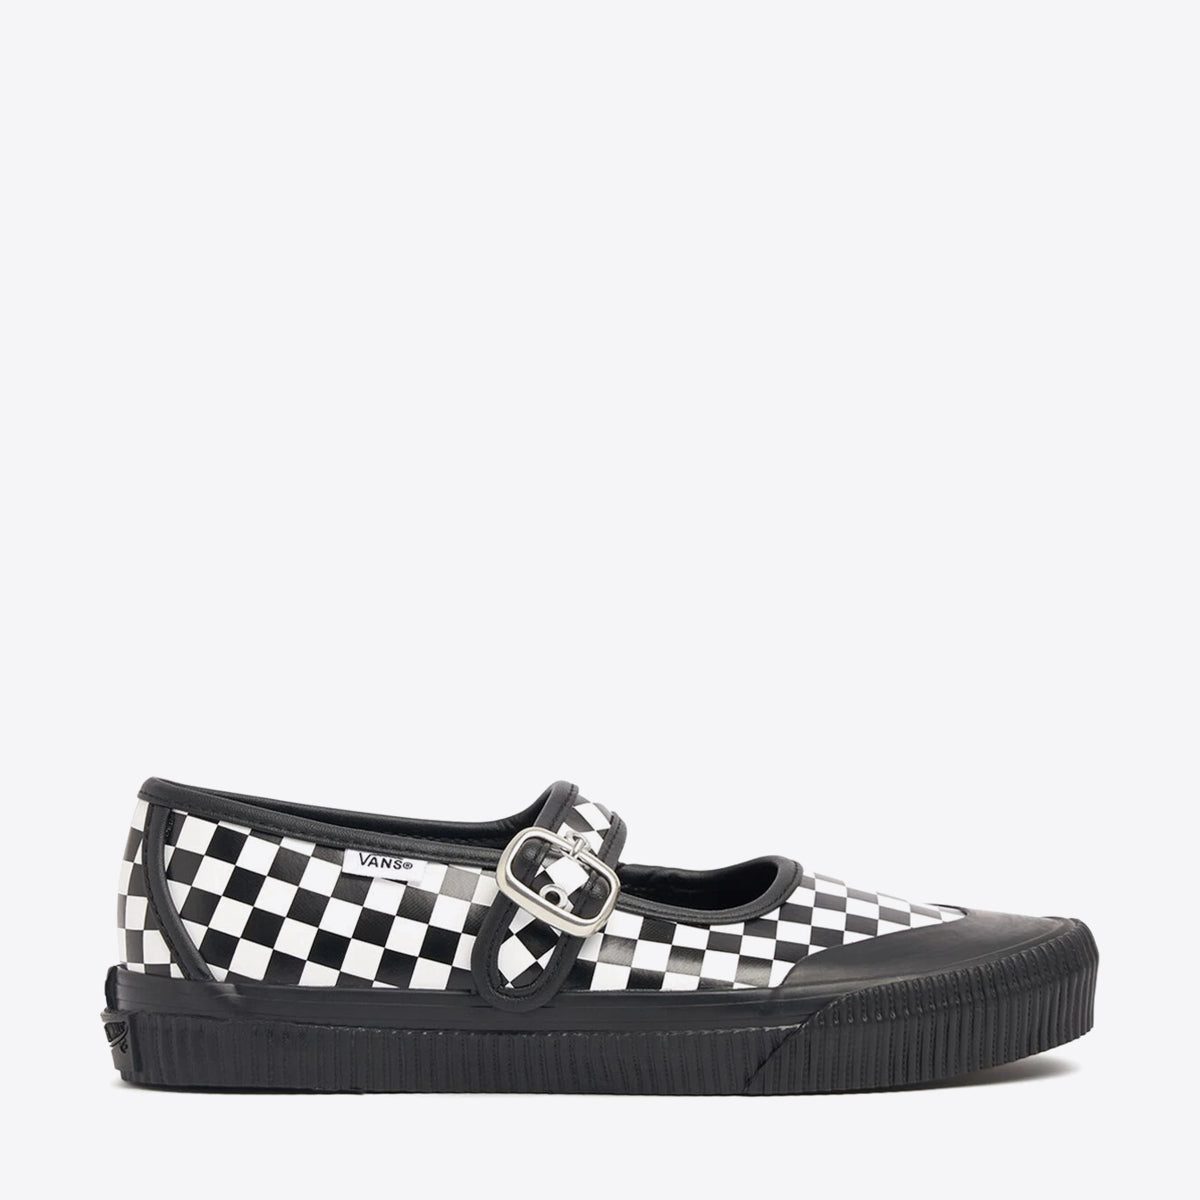 VANS Mary Jane LX Leather Creep Checkerboard Leather Checkerboard - Image 1